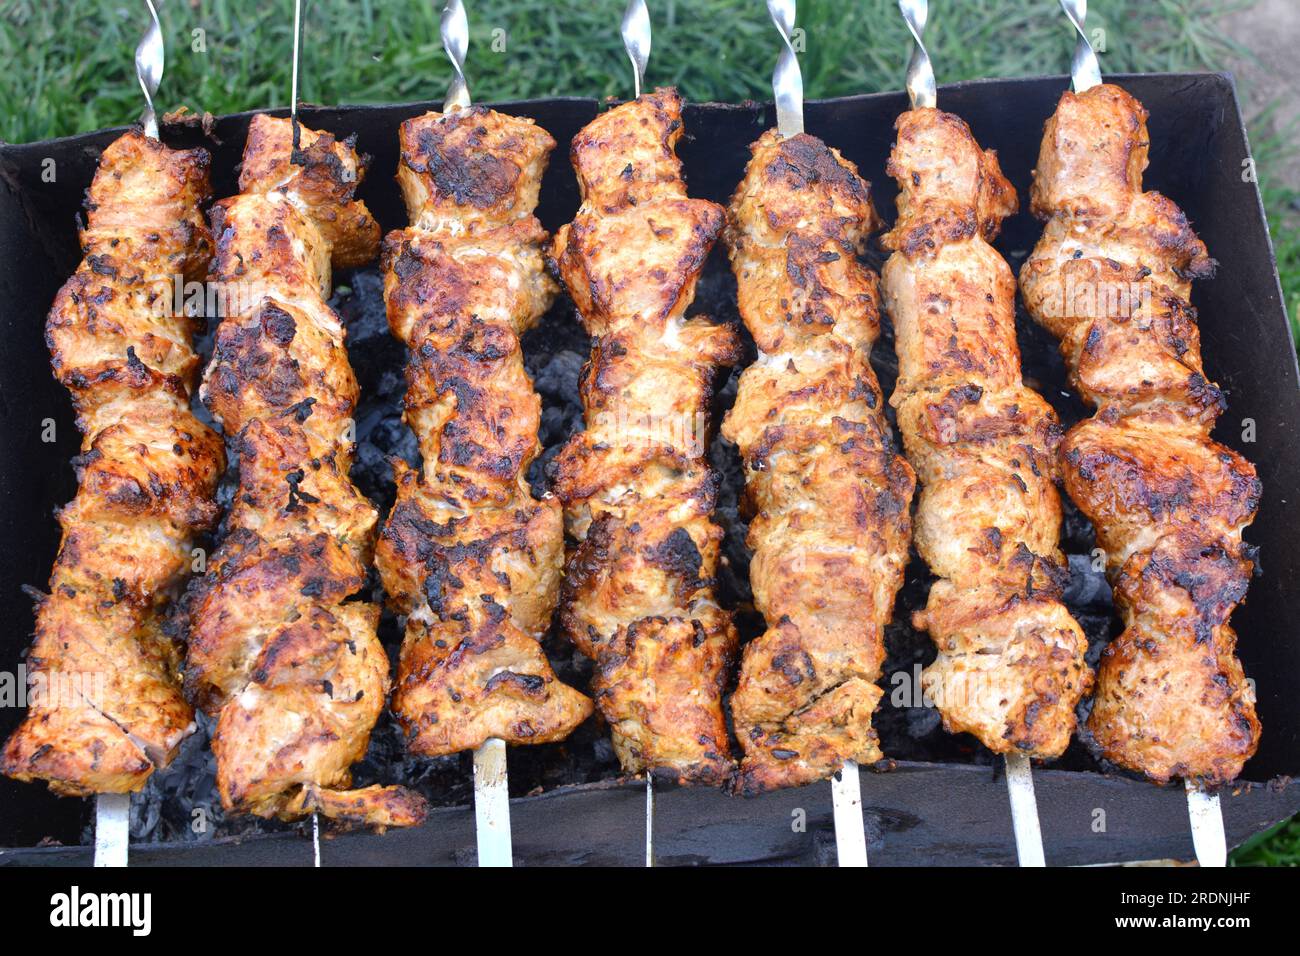 Meat skewers cooked on a hot brazier Stock Photo